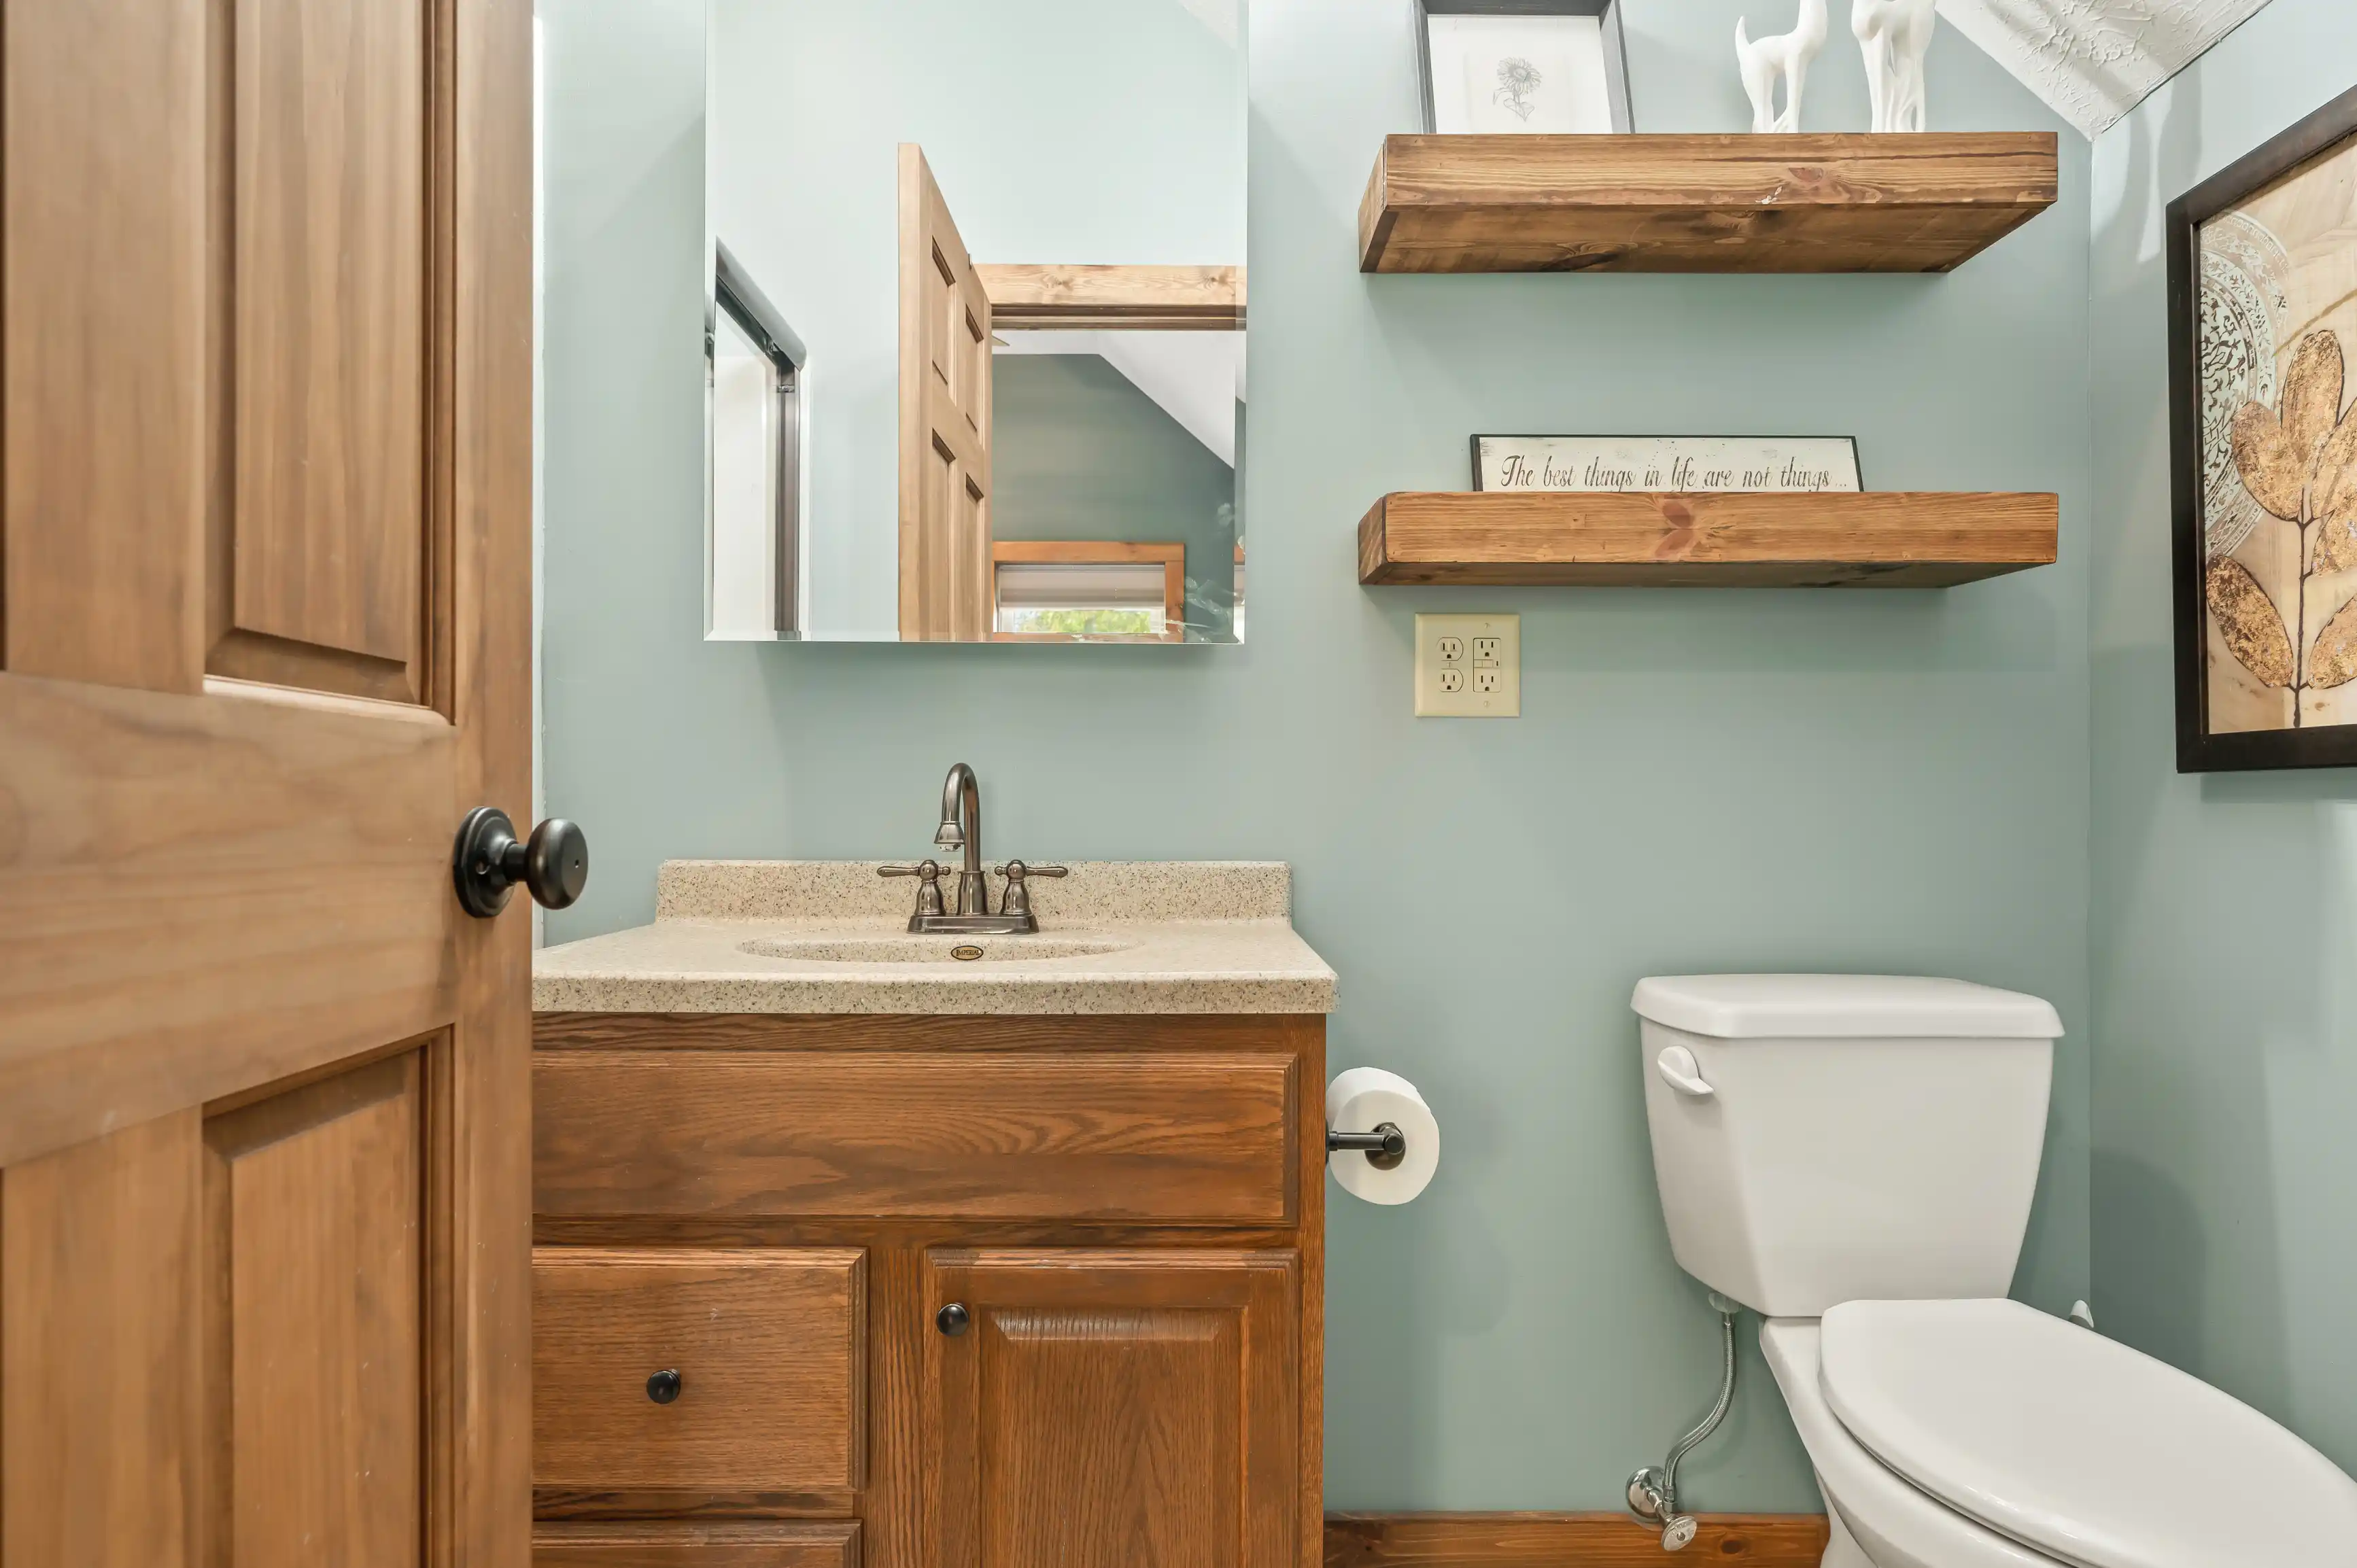 A small bathroom with aqua-colored walls, wooden vanity with granite countertop, mirror, floating wooden shelves, toilet, and wall art.